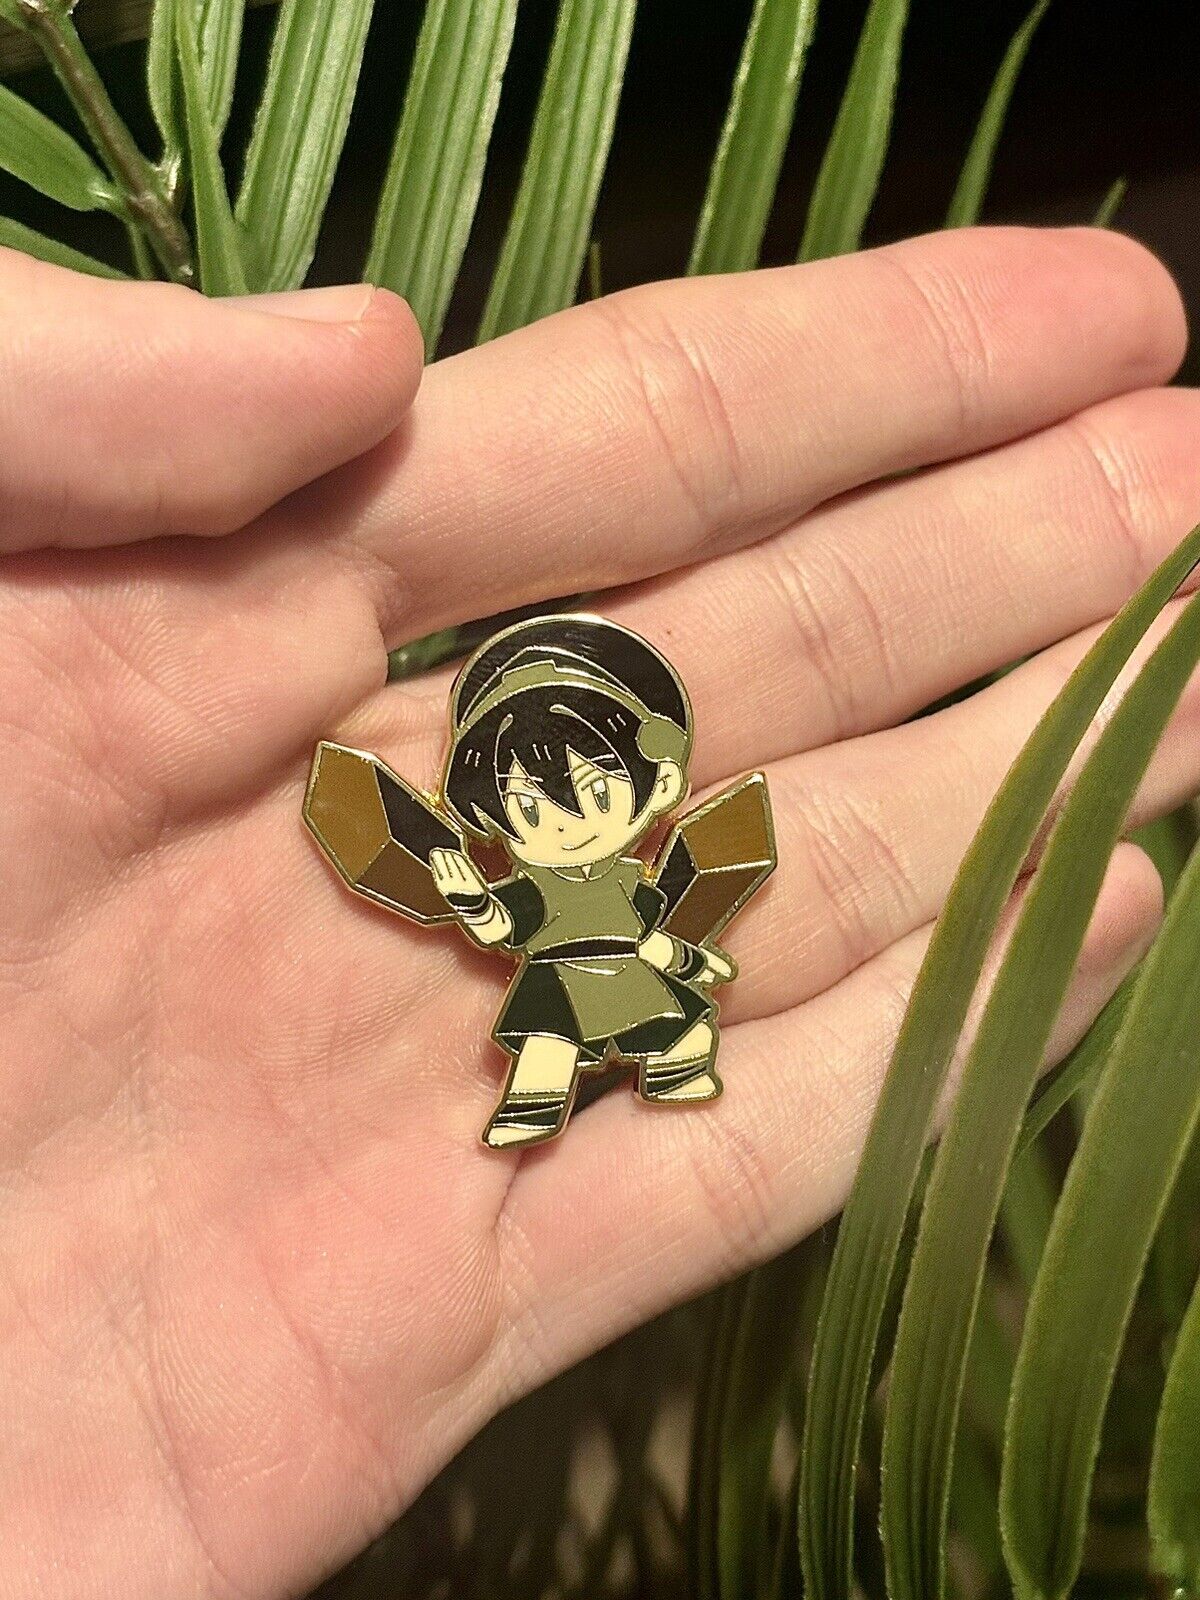 Avatar The Last Airbender Toph Enamel Pin Cute Anime Collectible Metal Pin